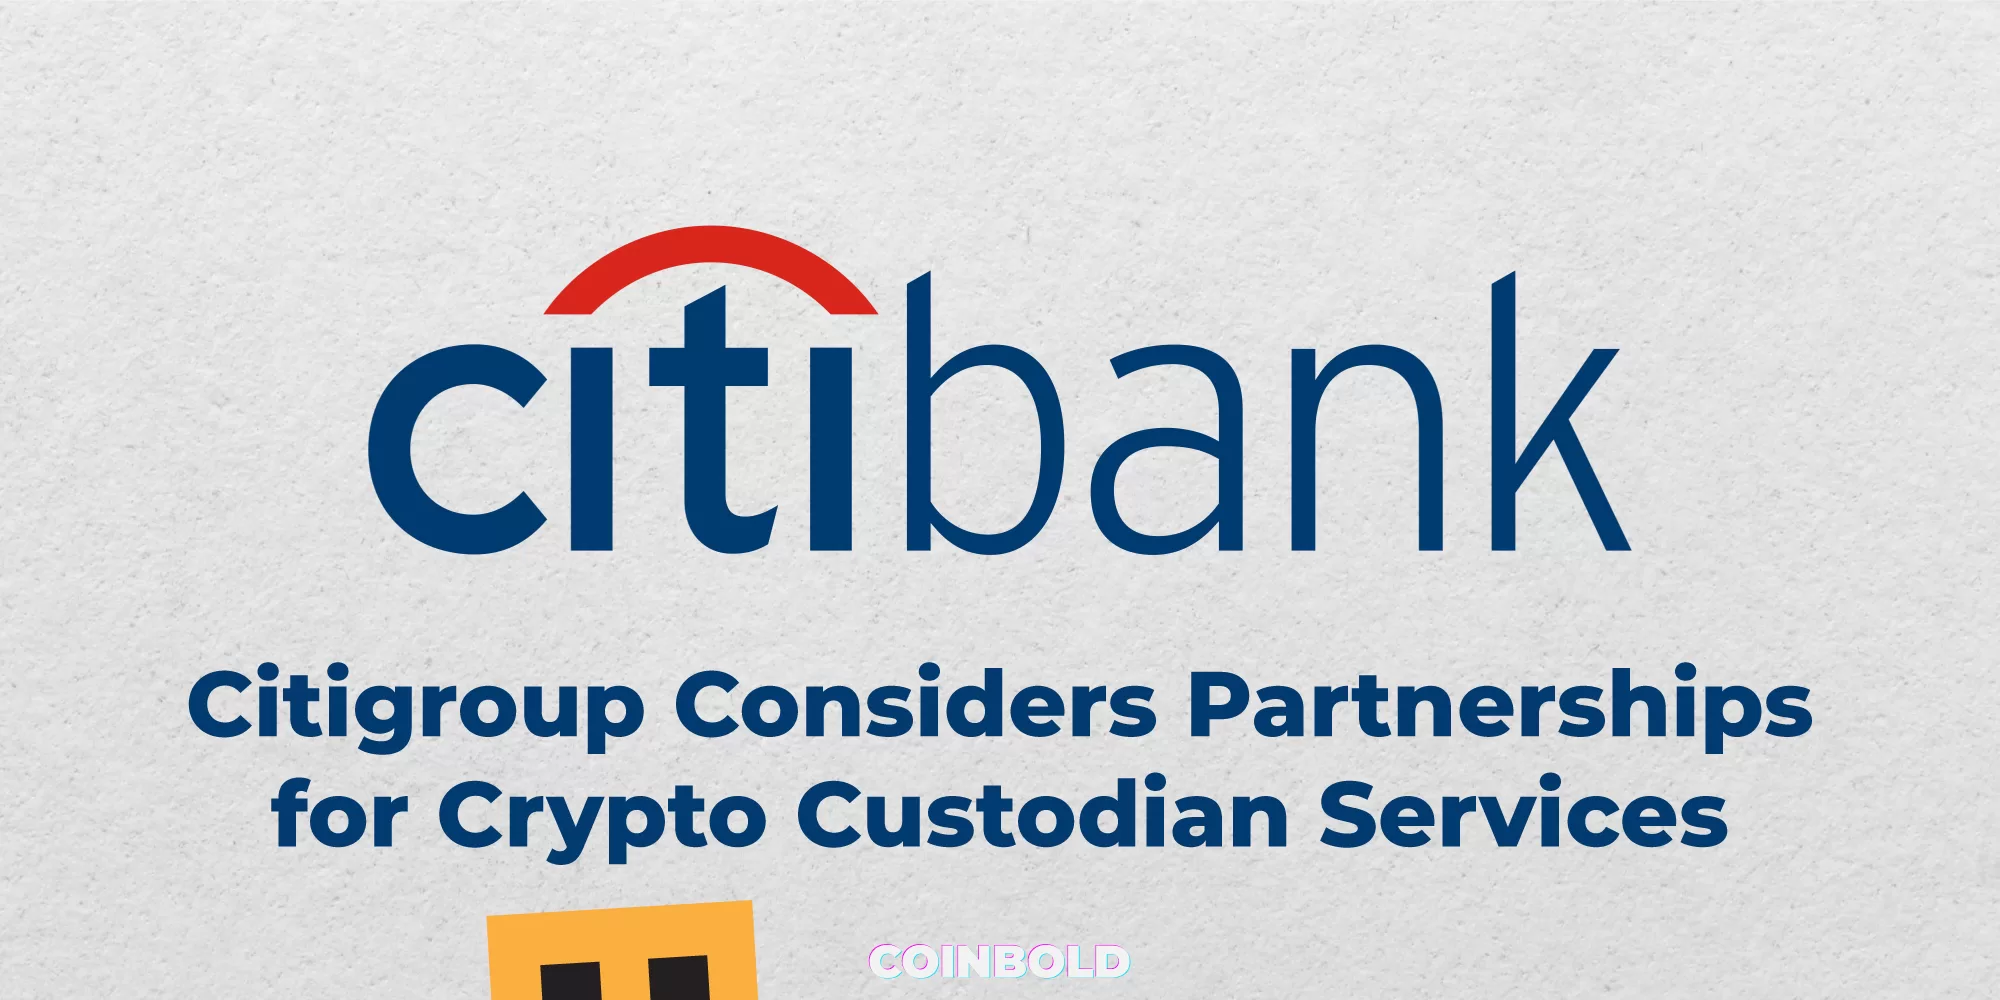 Citigroup Considers Partnerships for Crypto Custodian Services